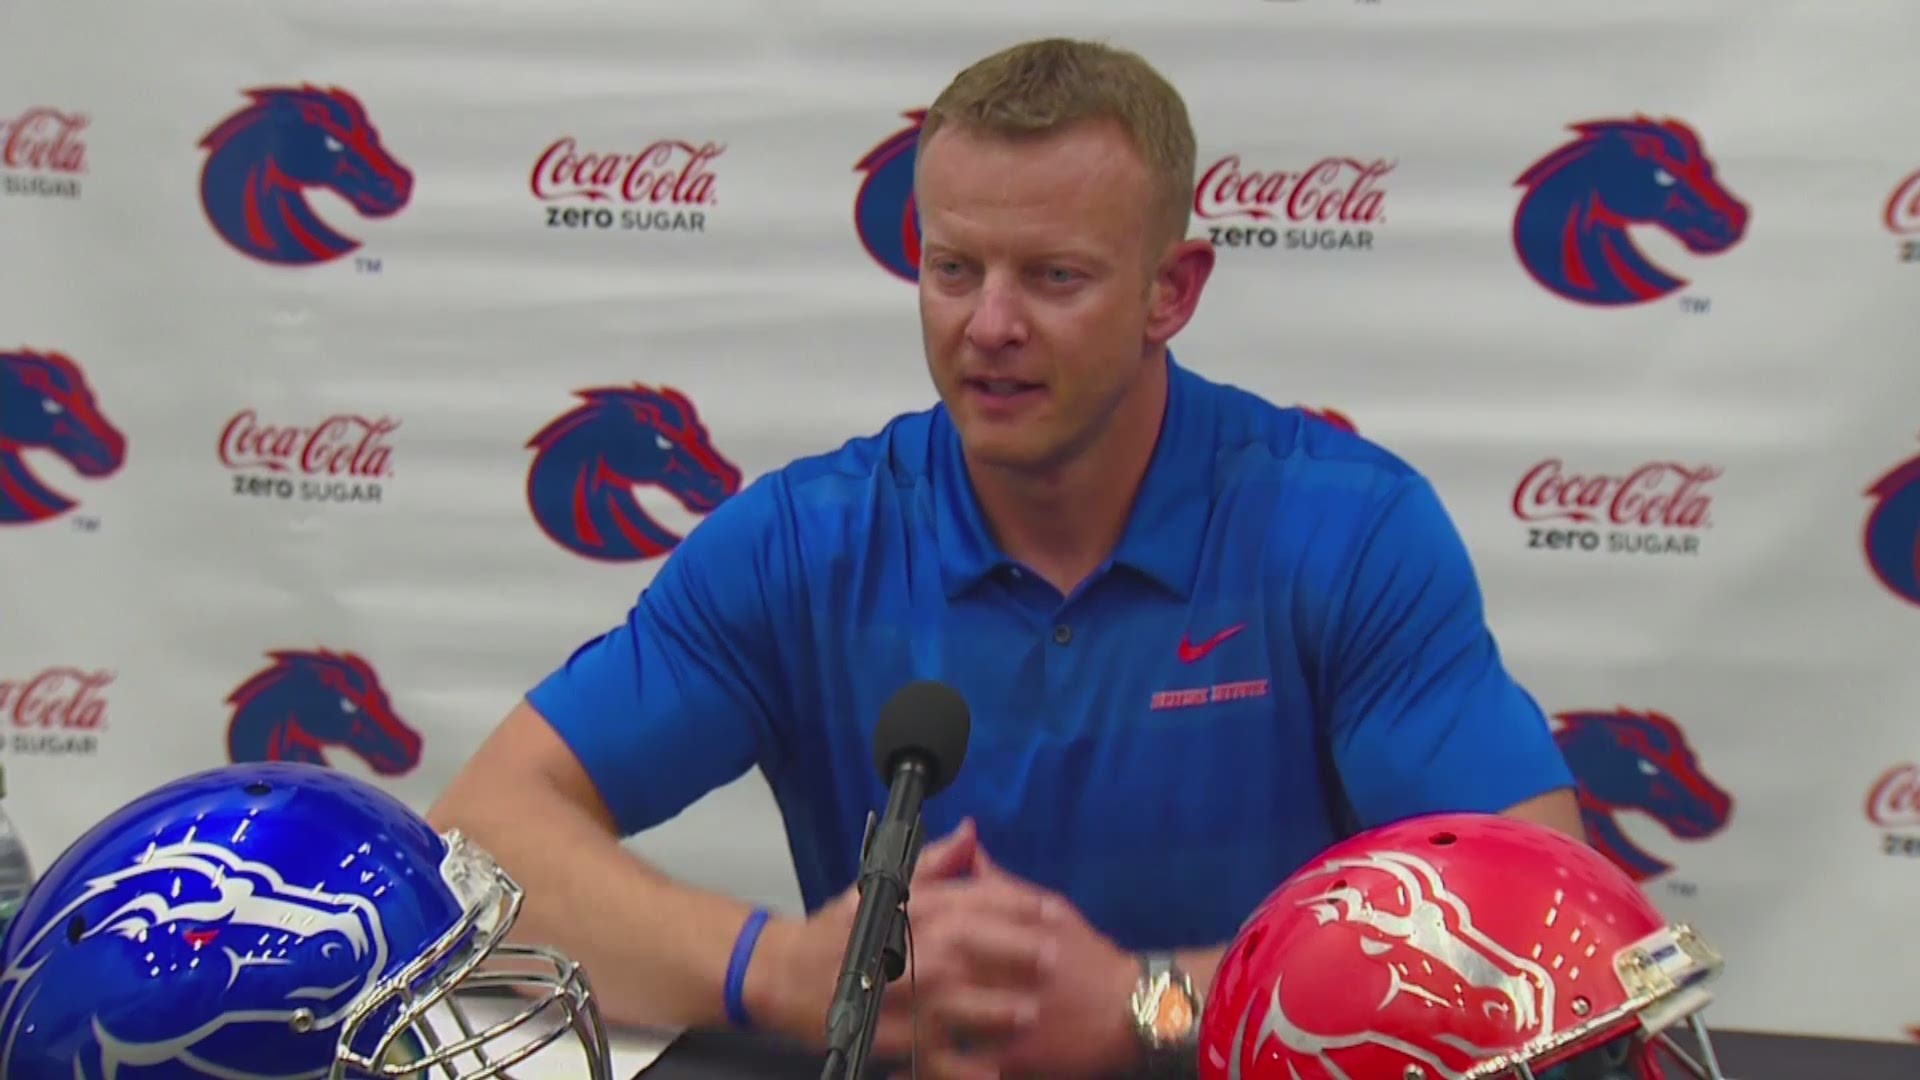 The Cougars come to Boise this Saturday to take on the Broncos. Harsin talks about the challenge his team faces.